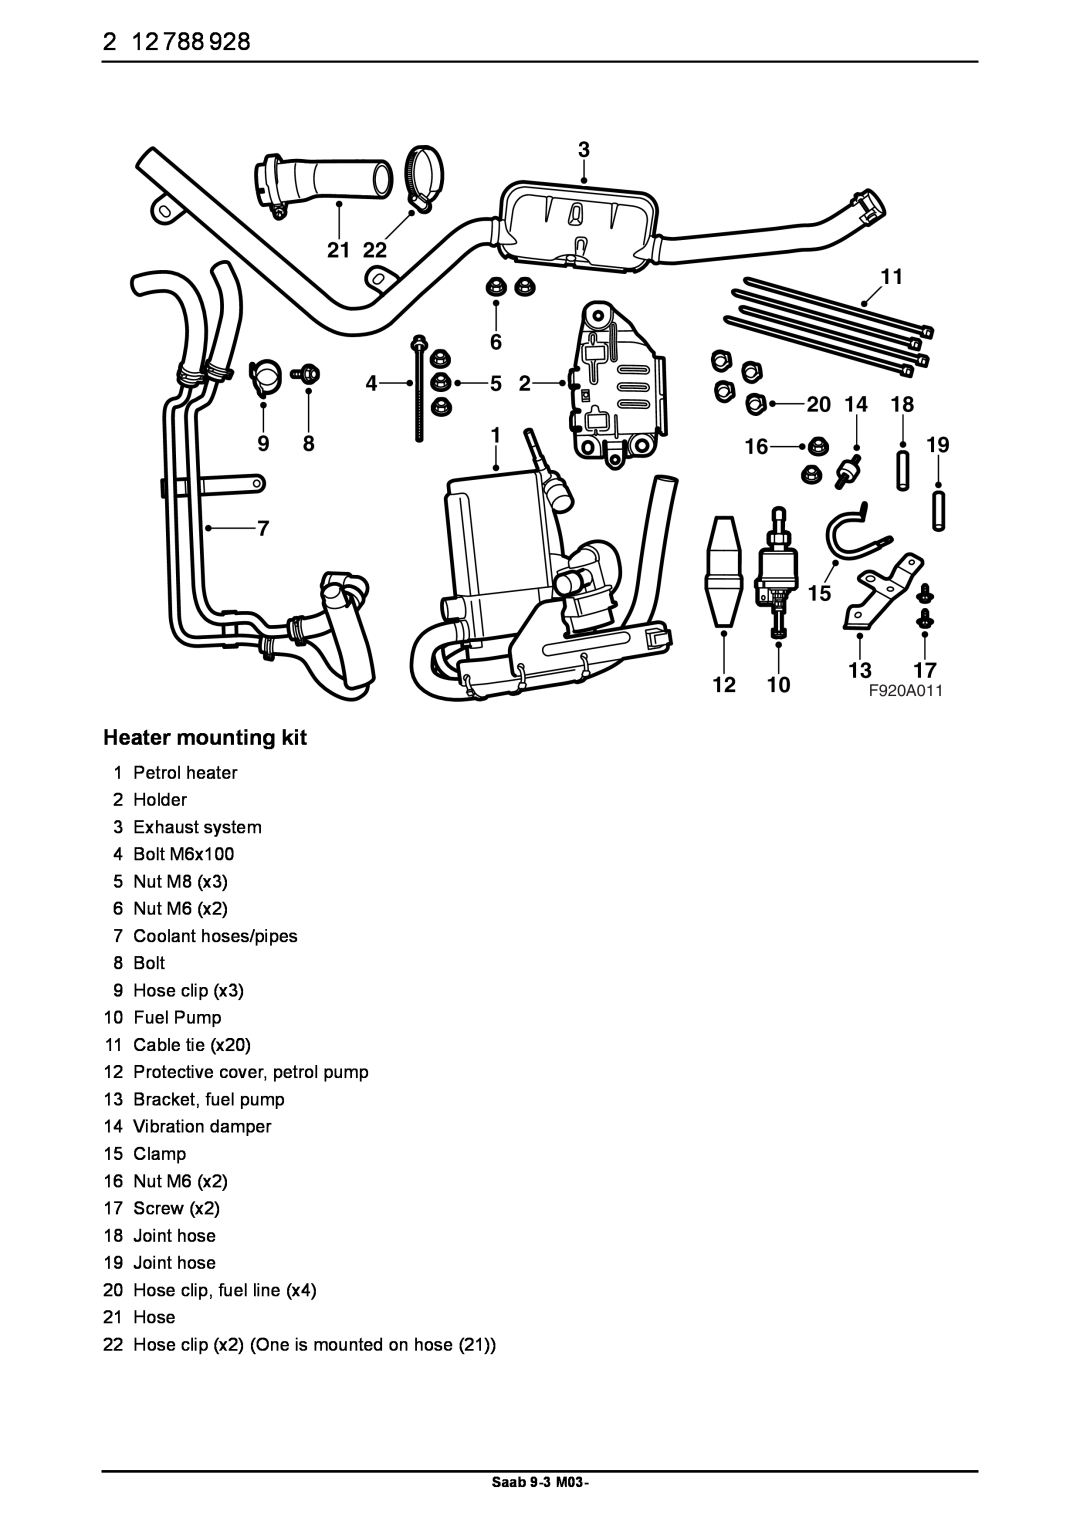 Saab 9-3 M03 Heater mounting kit, 11 20, 1Petrol heater 2Holder 3Exhaust system, 8Bolt 9Hose clip 10Fuel Pump 11Cable tie 